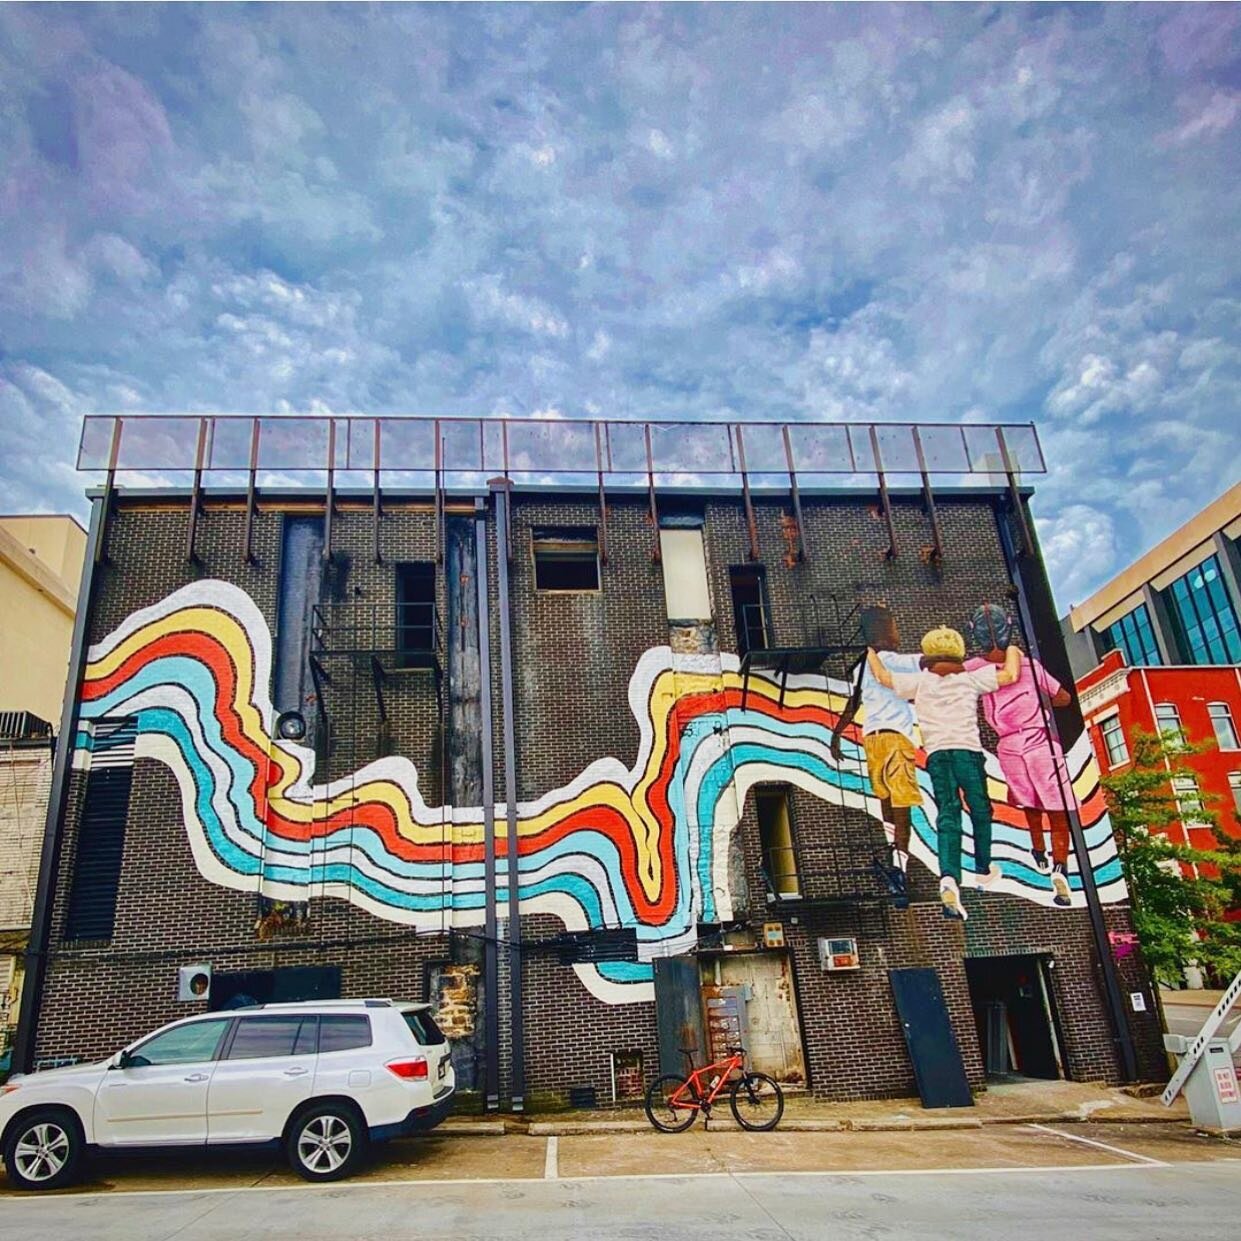 I got the opportunity to create this piece during summer 2020, in downtown Fayetteville along side 8 other great artists. 

The title of this piece is 

&ldquo;Better Together&rdquo; 

The way I approach public art is to create mural that inspires th